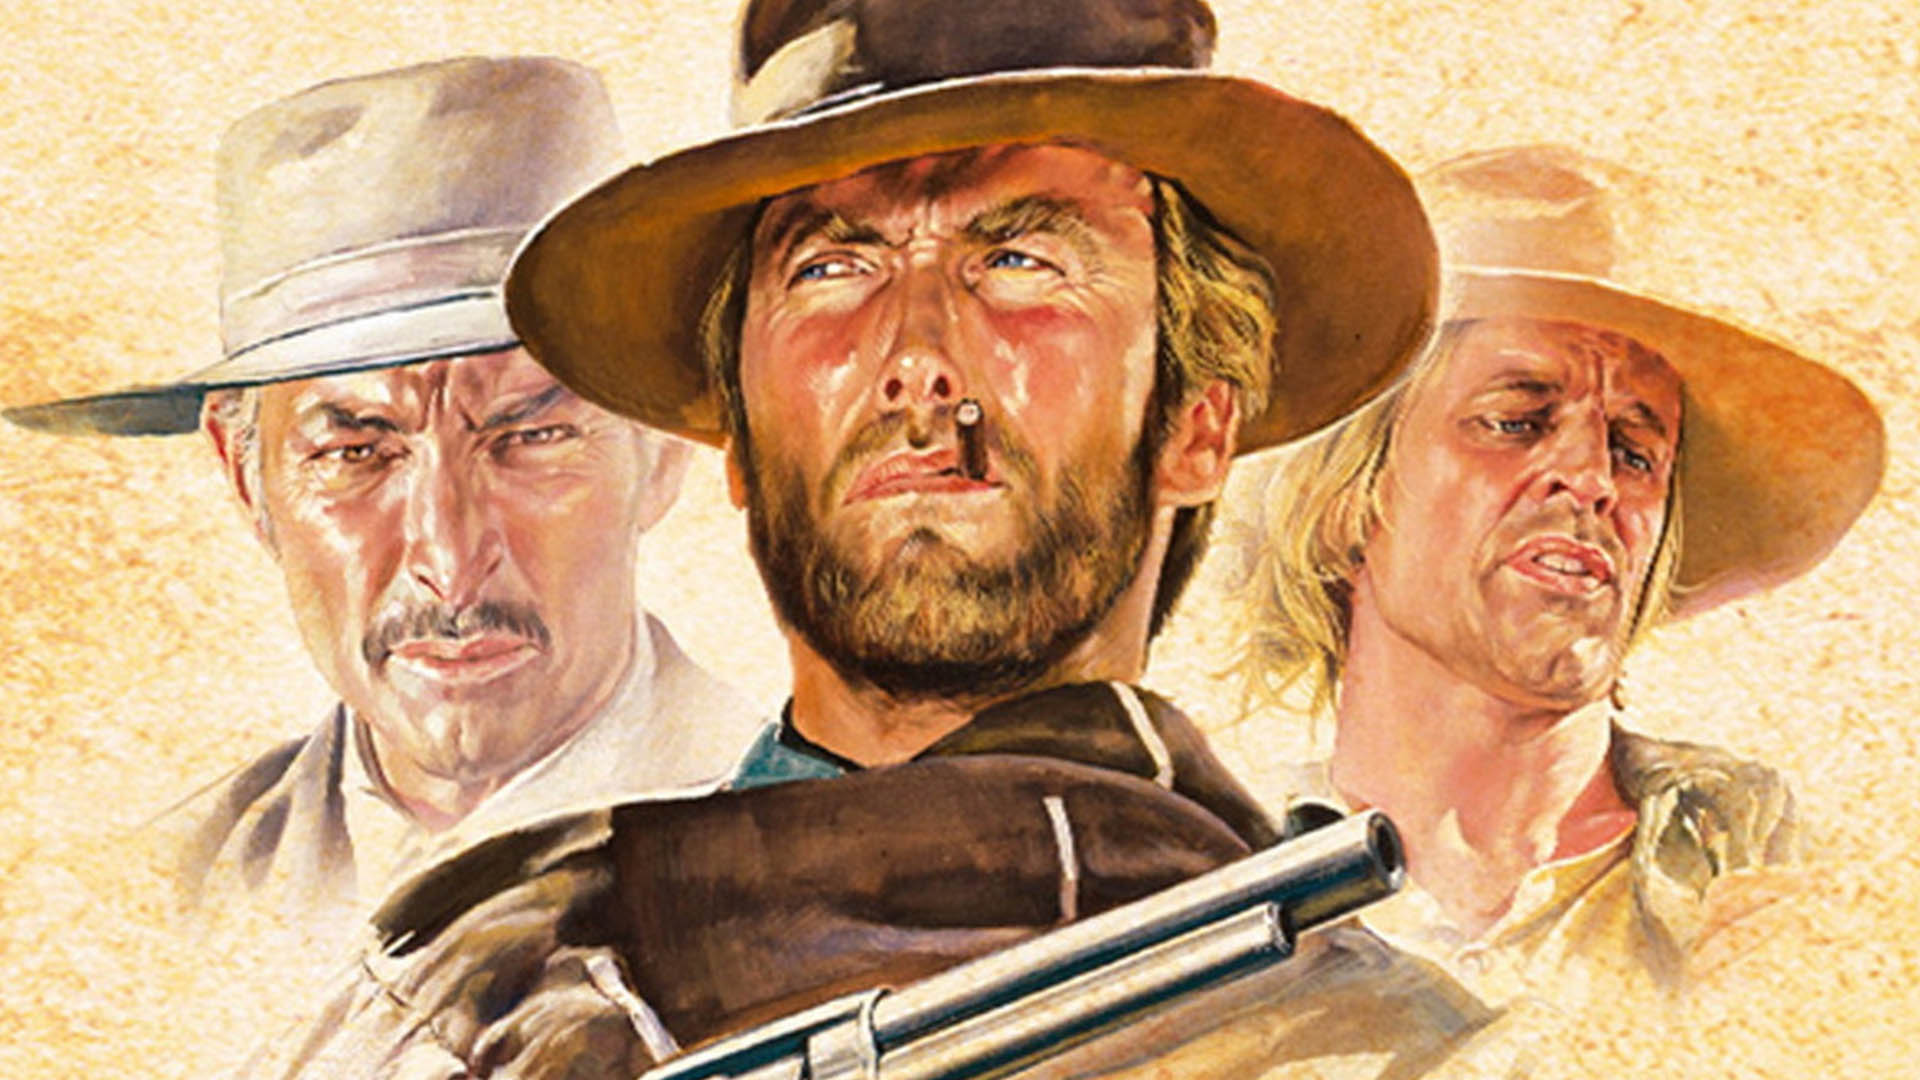 Watch For a Few Dollars More Online | Stream Full Movies